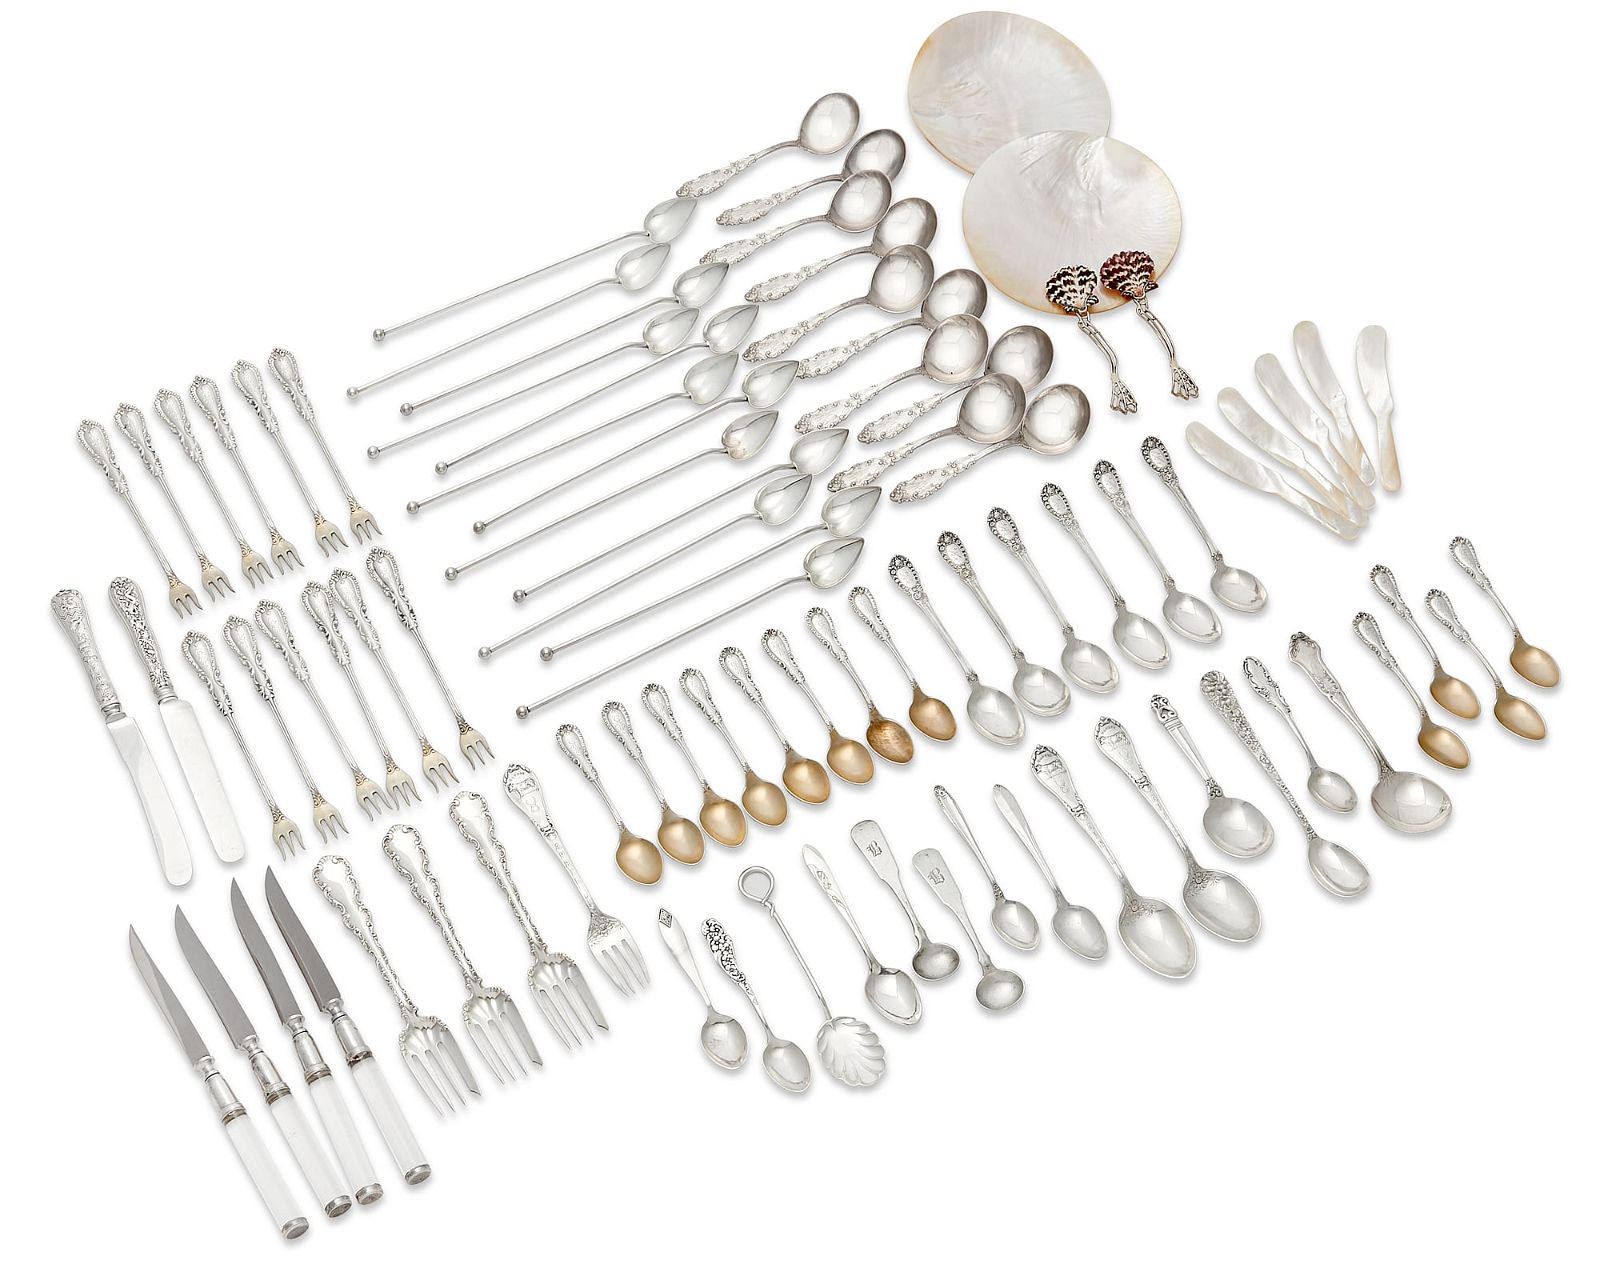 A GROUP OF AMERICAN STERLING SILVER